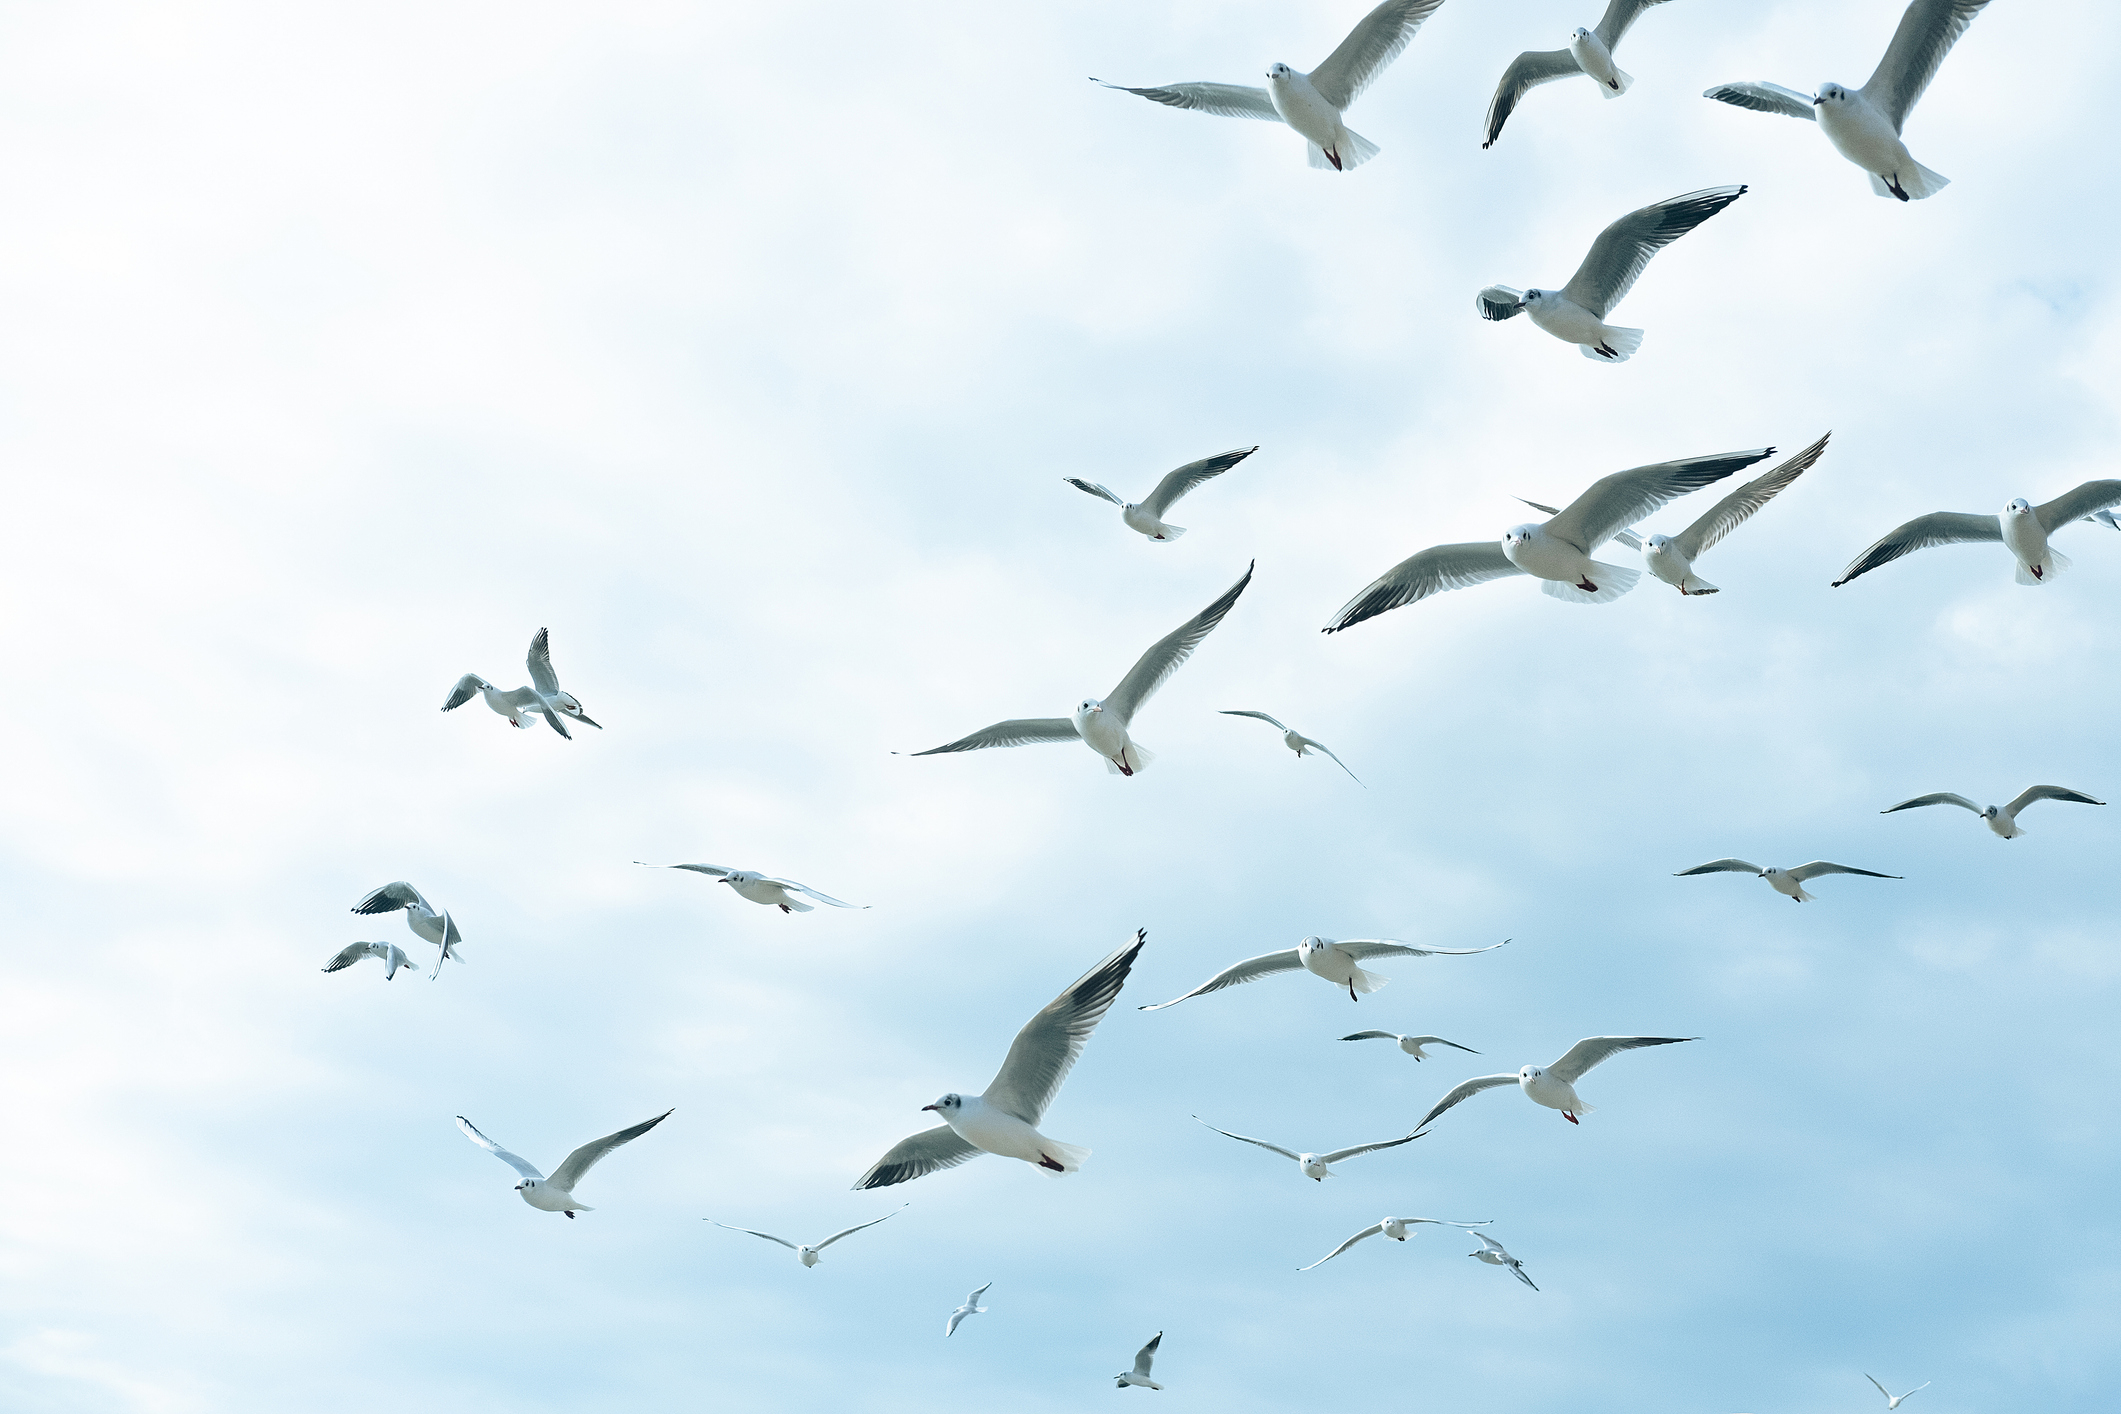 A flock of seagulls flying in an open, cloudy sky